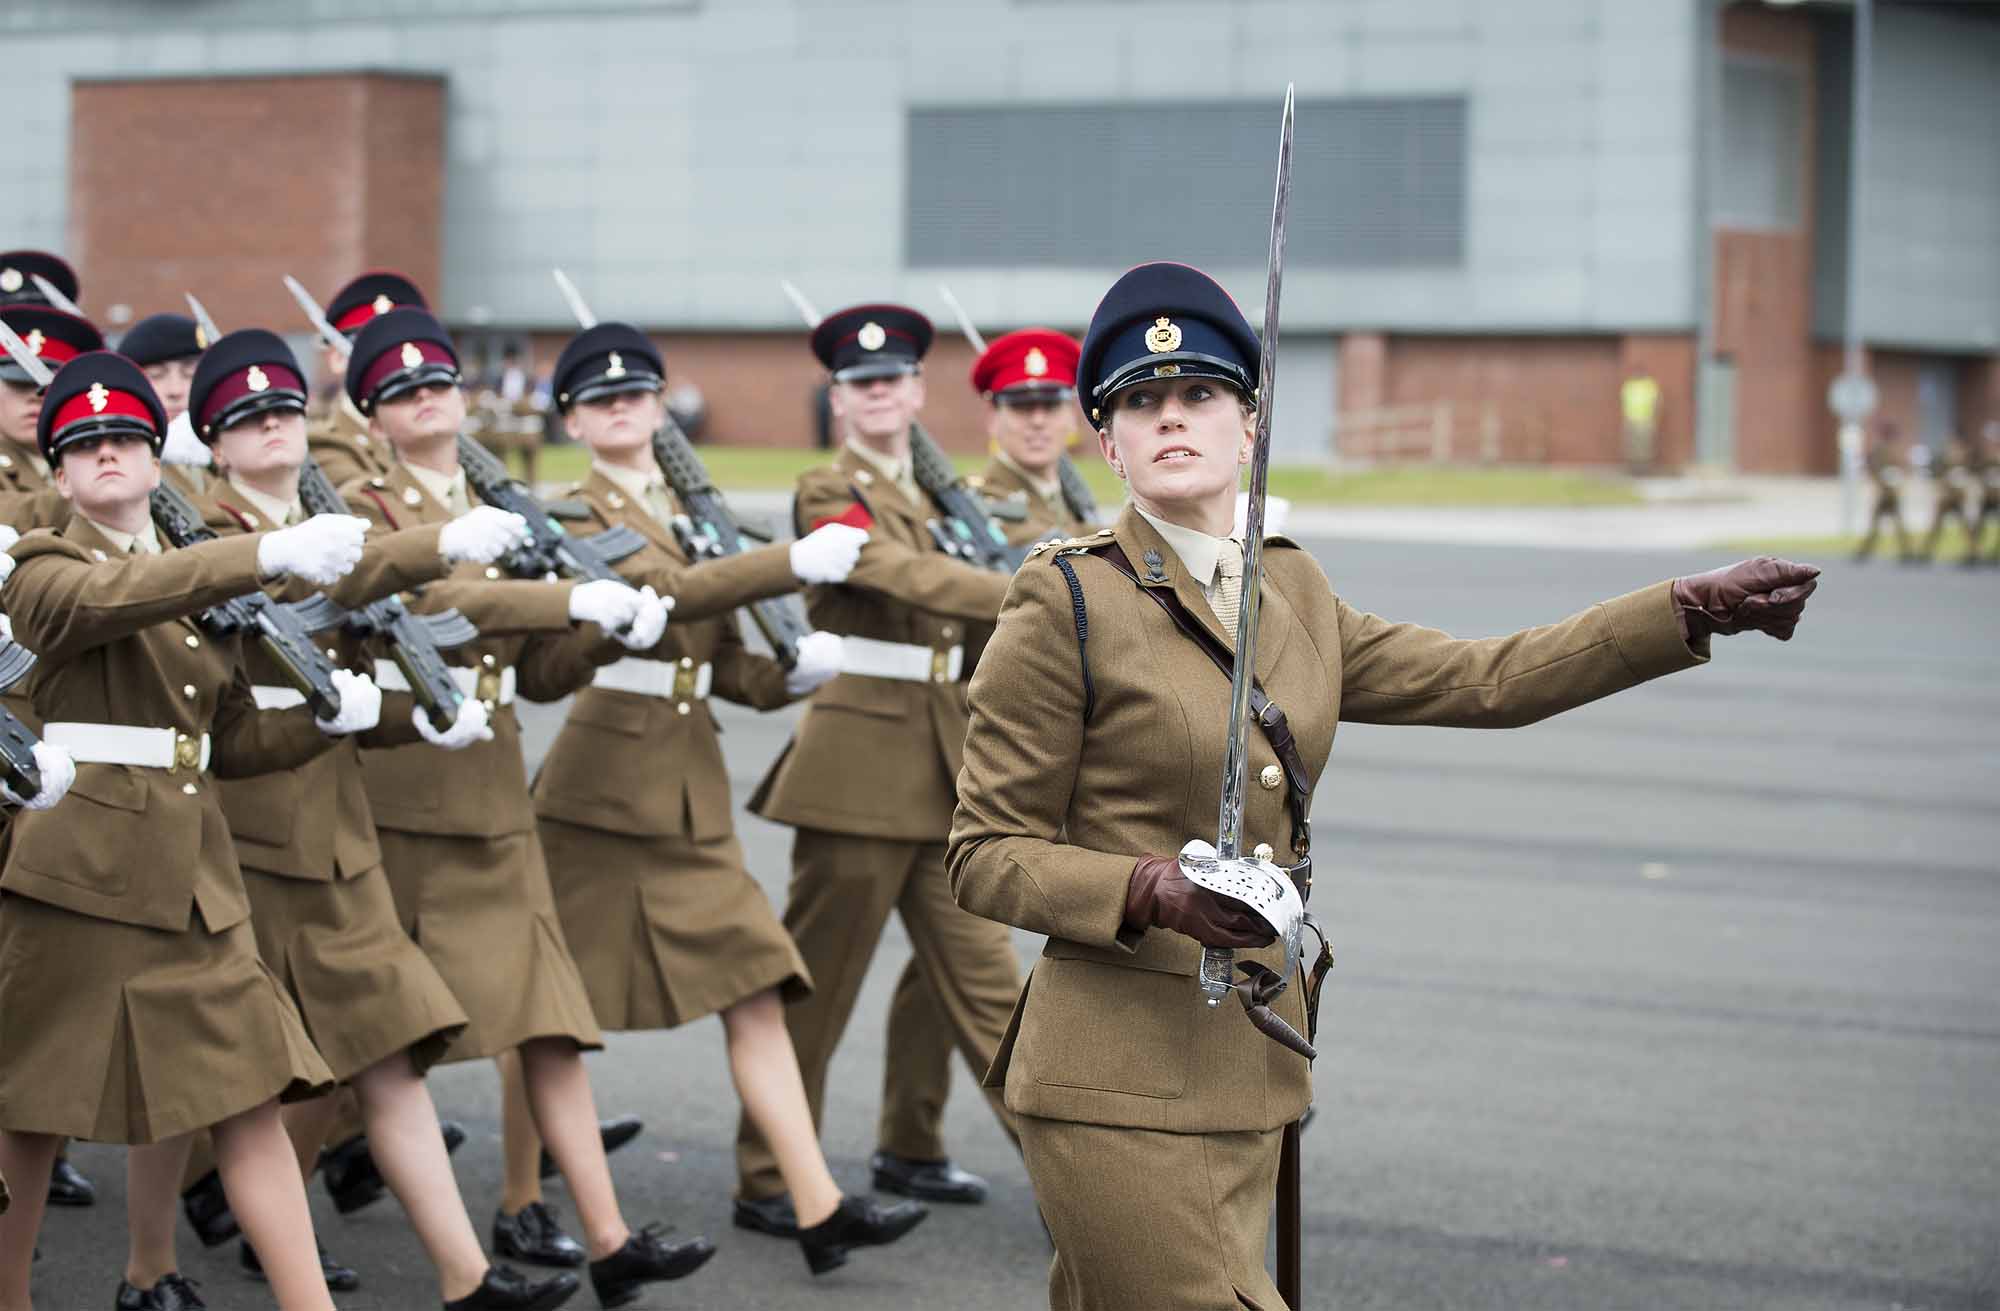 Pictured:Captain Ruth Cork leading her platoon of Junior Soldiers past the crowds and saluting officer.  More than 600 teenagers from the Army Foundation College marched on their way to a new career when they graduated from the military training establishment in Harrogate, North Yorkshire. The college in Penny Pot Lane, Harrogate runs two types of course – a 40-week long course and a shorter 20-week course to train 16-17 year olds for a wide variety of Army careers. NOTE TO DESKS:  MoD release authorised handout images.  All images remain Crown Copyright 2016.  Photo credit to read -Sgt Jamie Peters RLC (Phot) Email: jamiepeters@mediaops.army.mod.uk richardwatt@mediaops.army.mod.uk shanewilkinson@mediaops.army.mod.uk Richard Watt - 07836 515306 Shane Wilkinson - 07901 590723